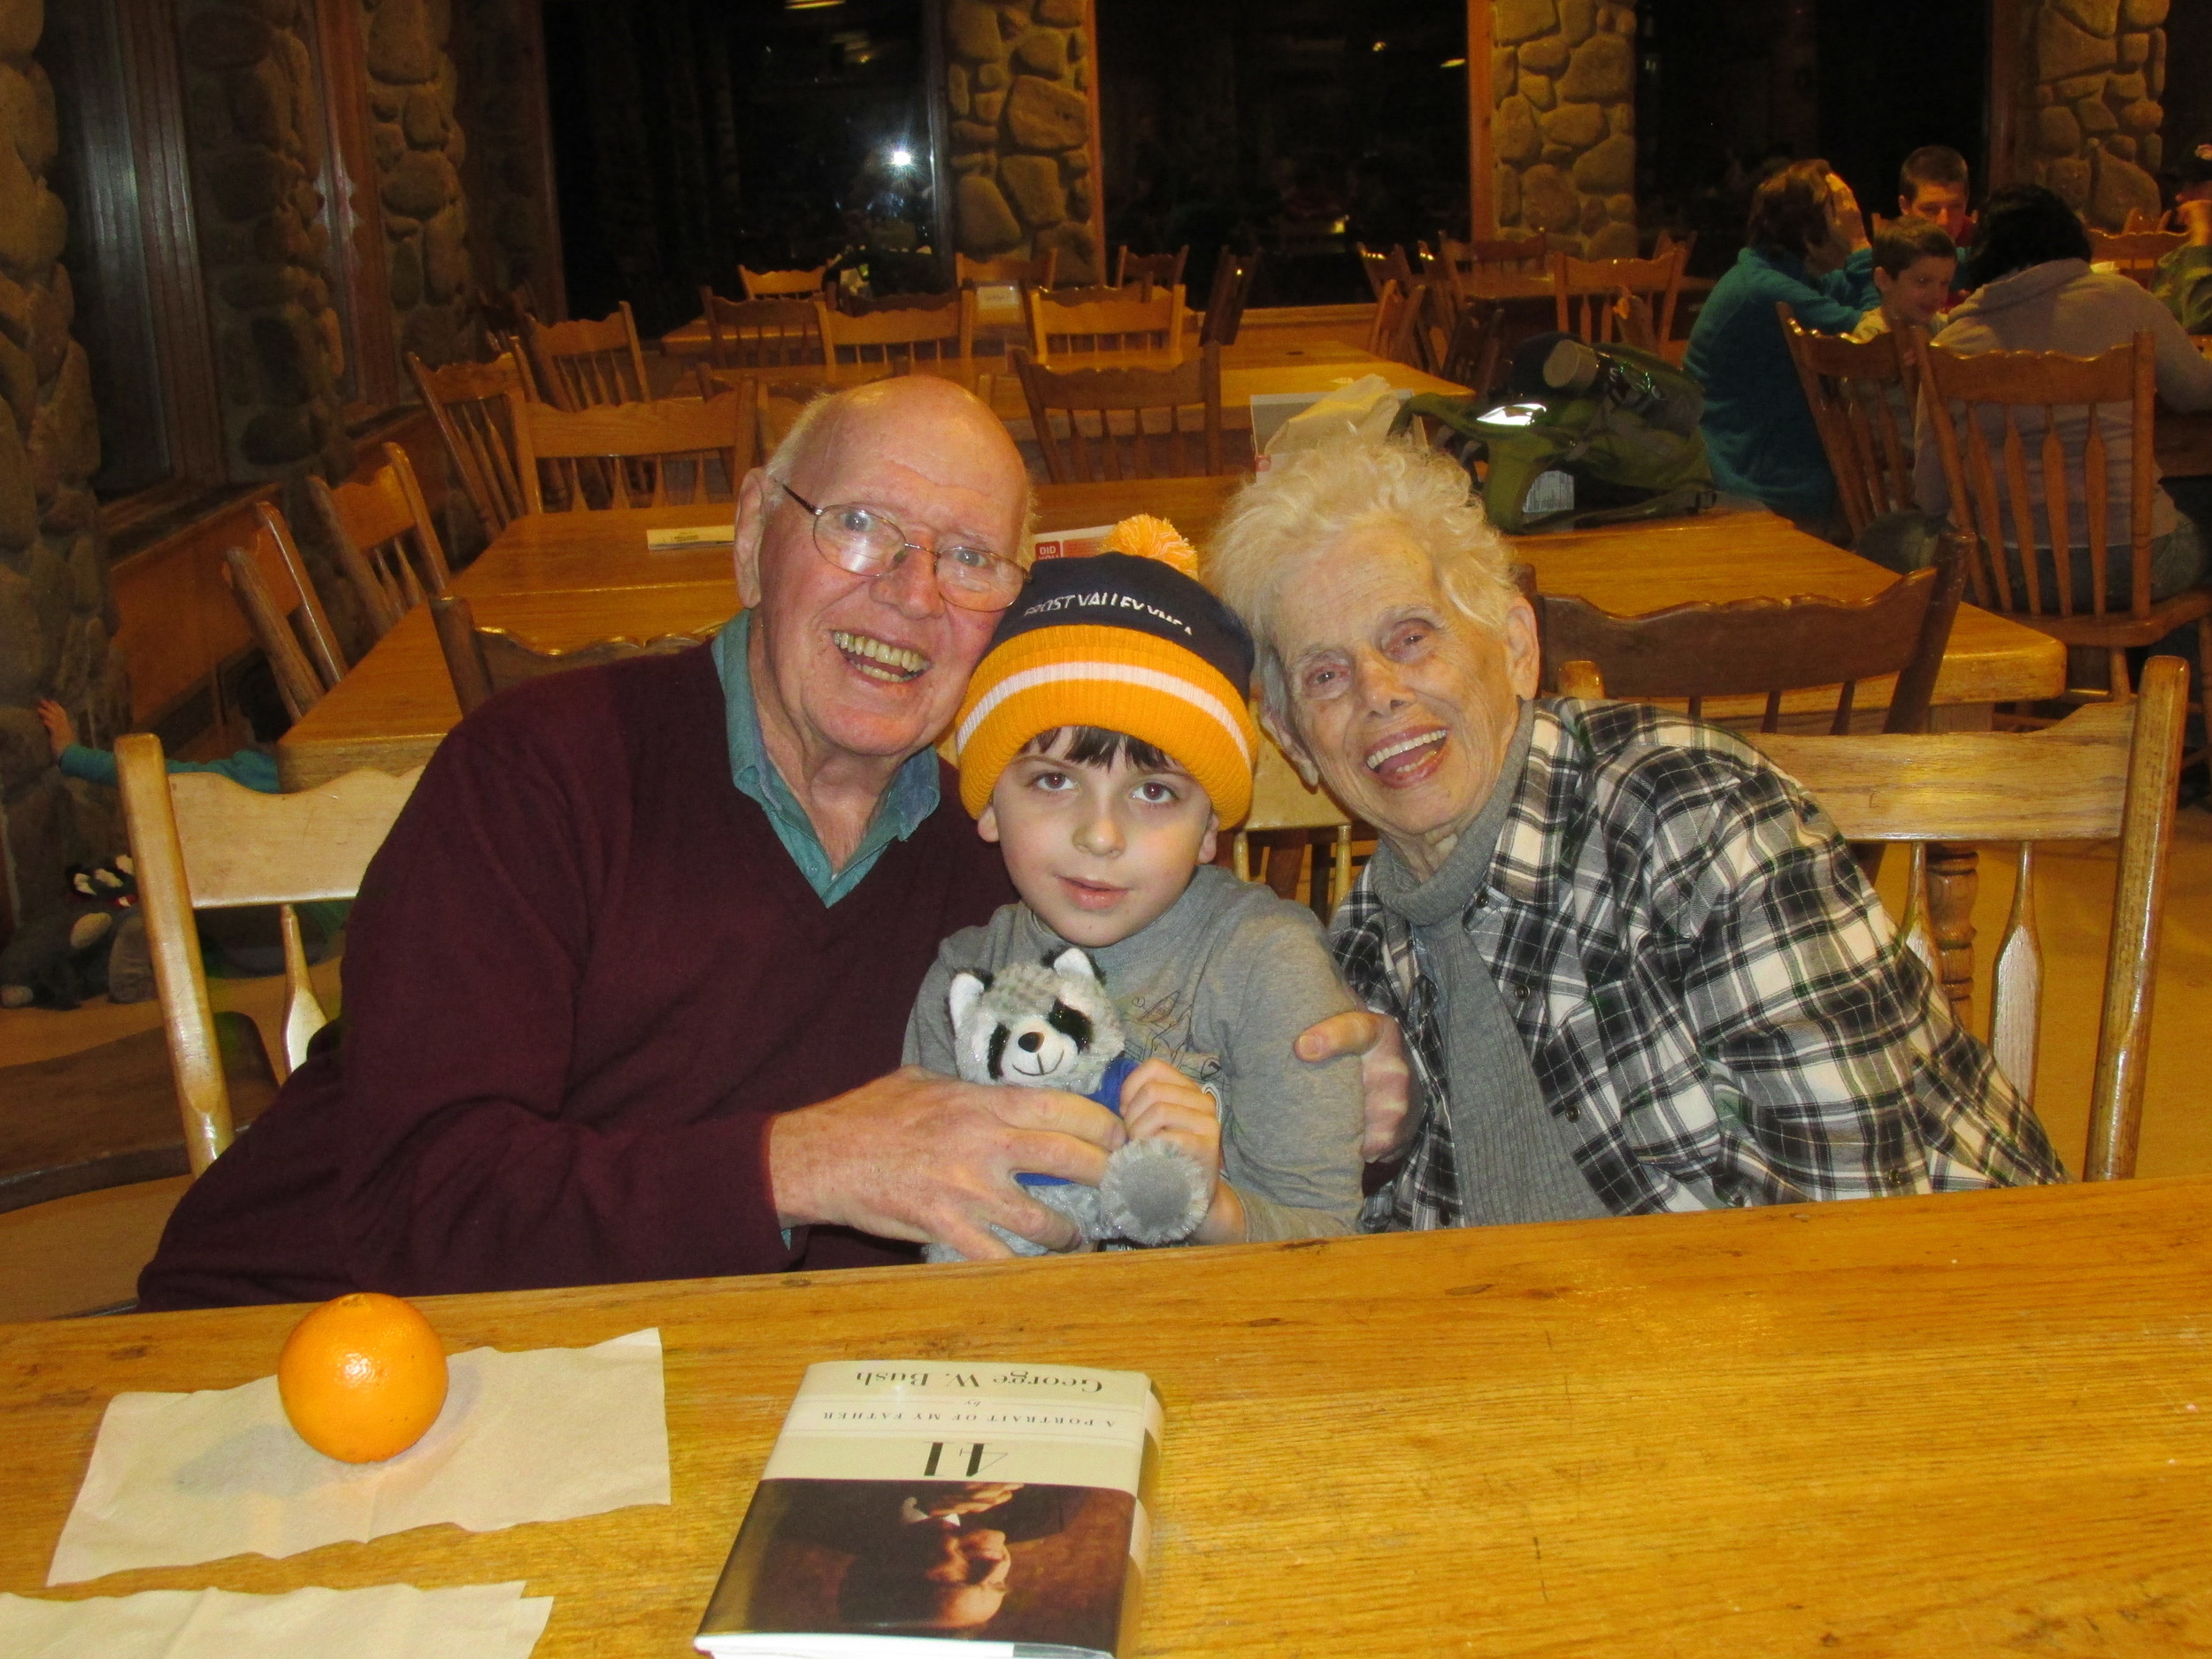 Jack McDonough, 84, left, with his grandson Johnny, 7, and his wife Lucille, 87, in Frost Valley, NY in 2015.